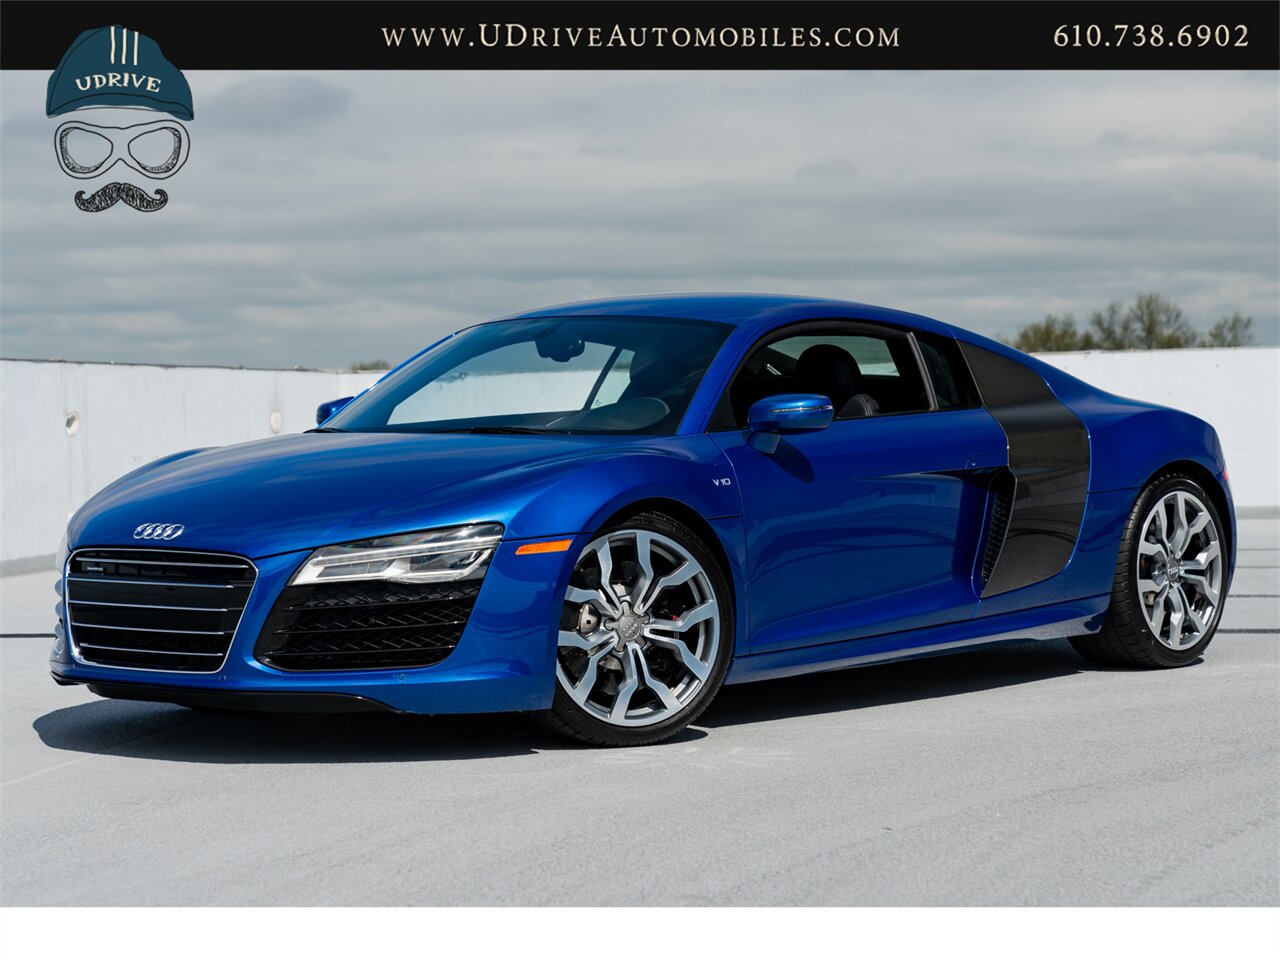 2015 Audi R8 5.2 V10 Quattro 6 Speed Manual 10k Miles  Diamond Stitched Leather 1 of 2 - Photo 1 - West Chester, PA 19382